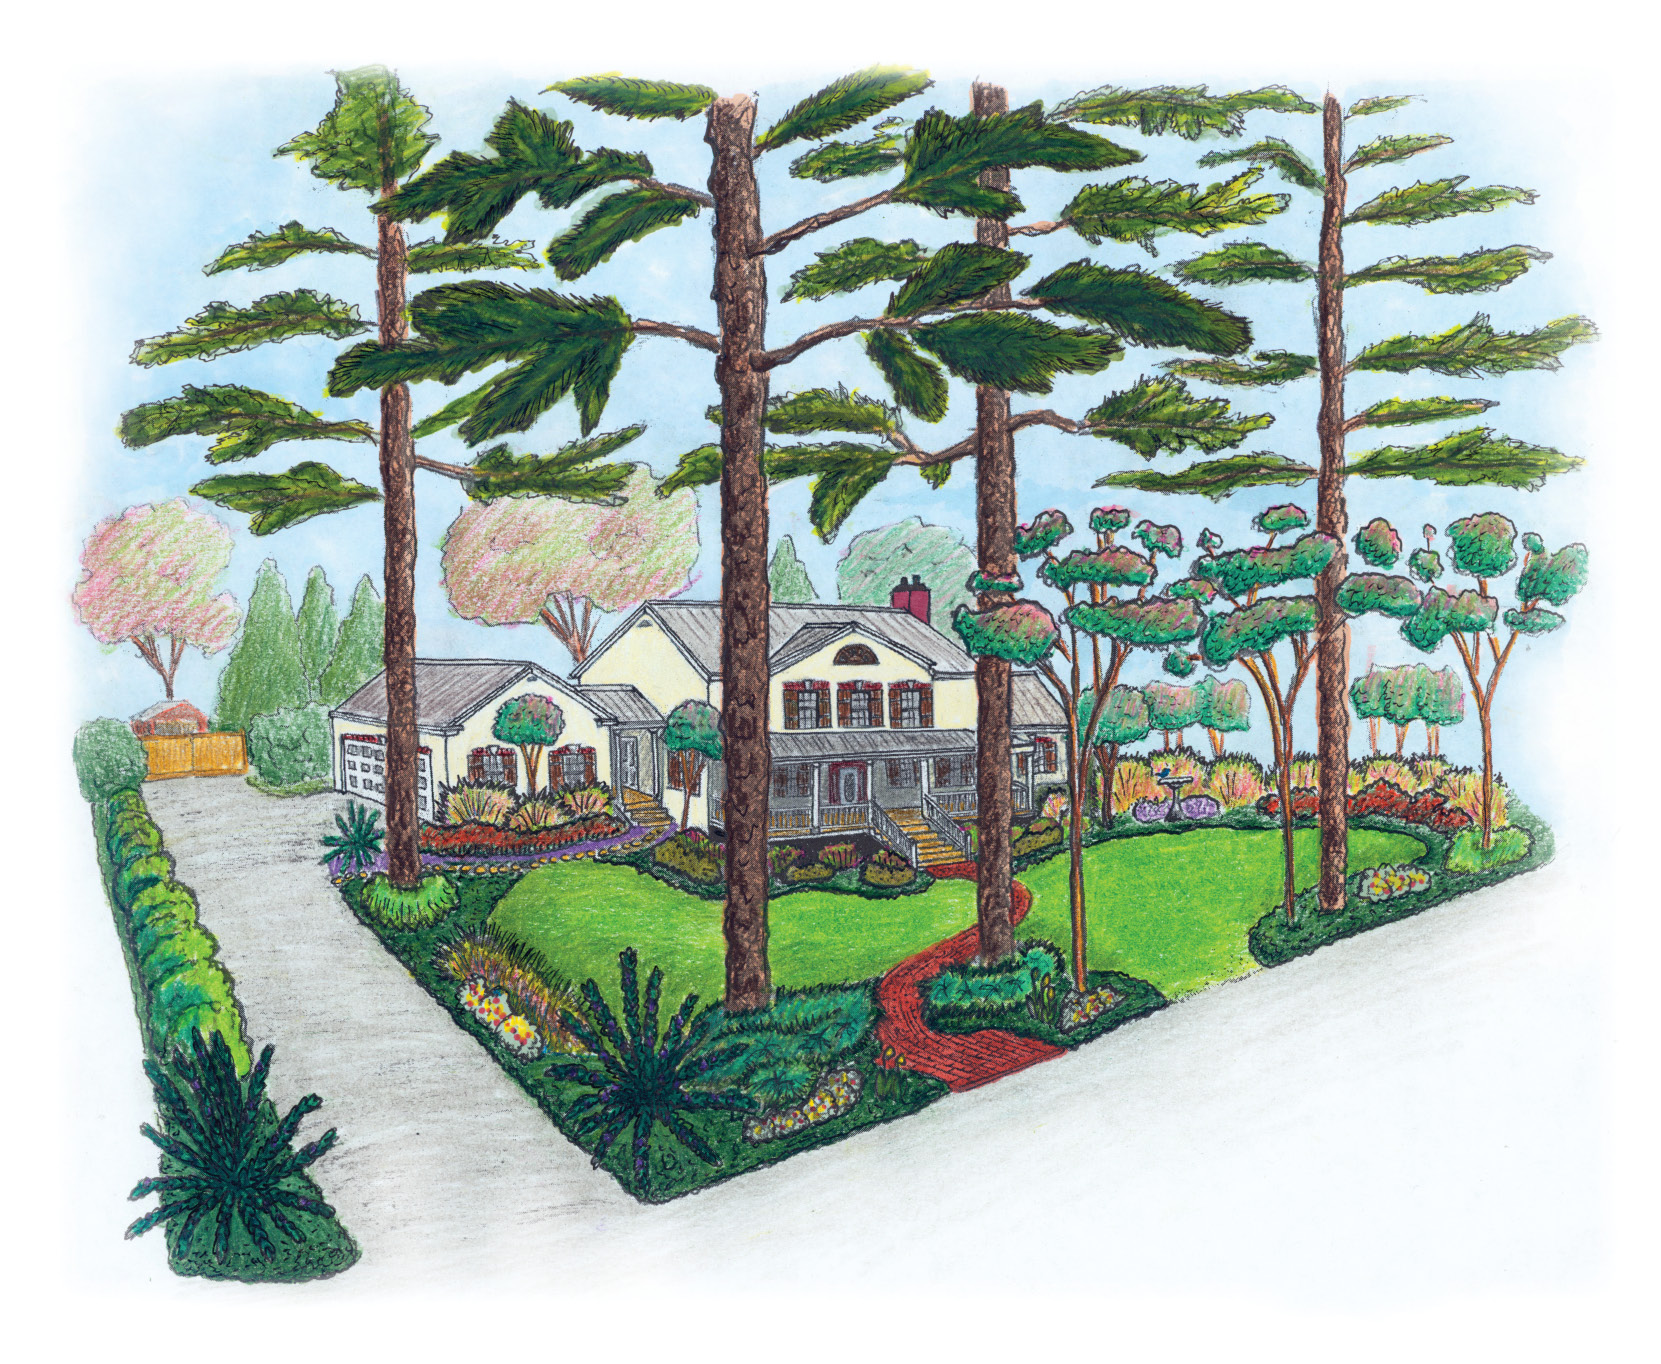 Drawing of a home and surrounding landscape, with trees, shrubs, and other accent plantings.